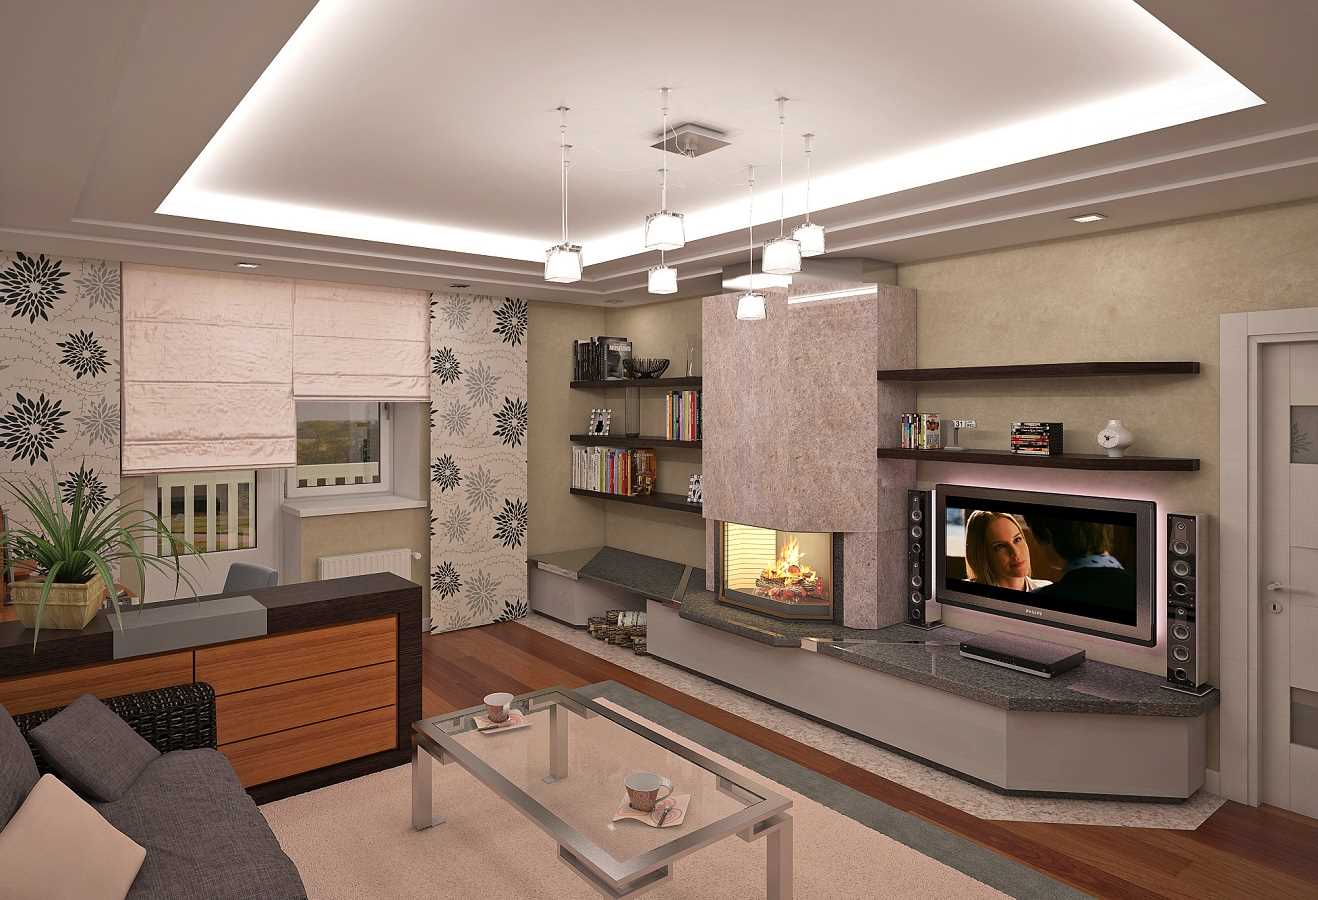 An example of a light design living room with fireplace